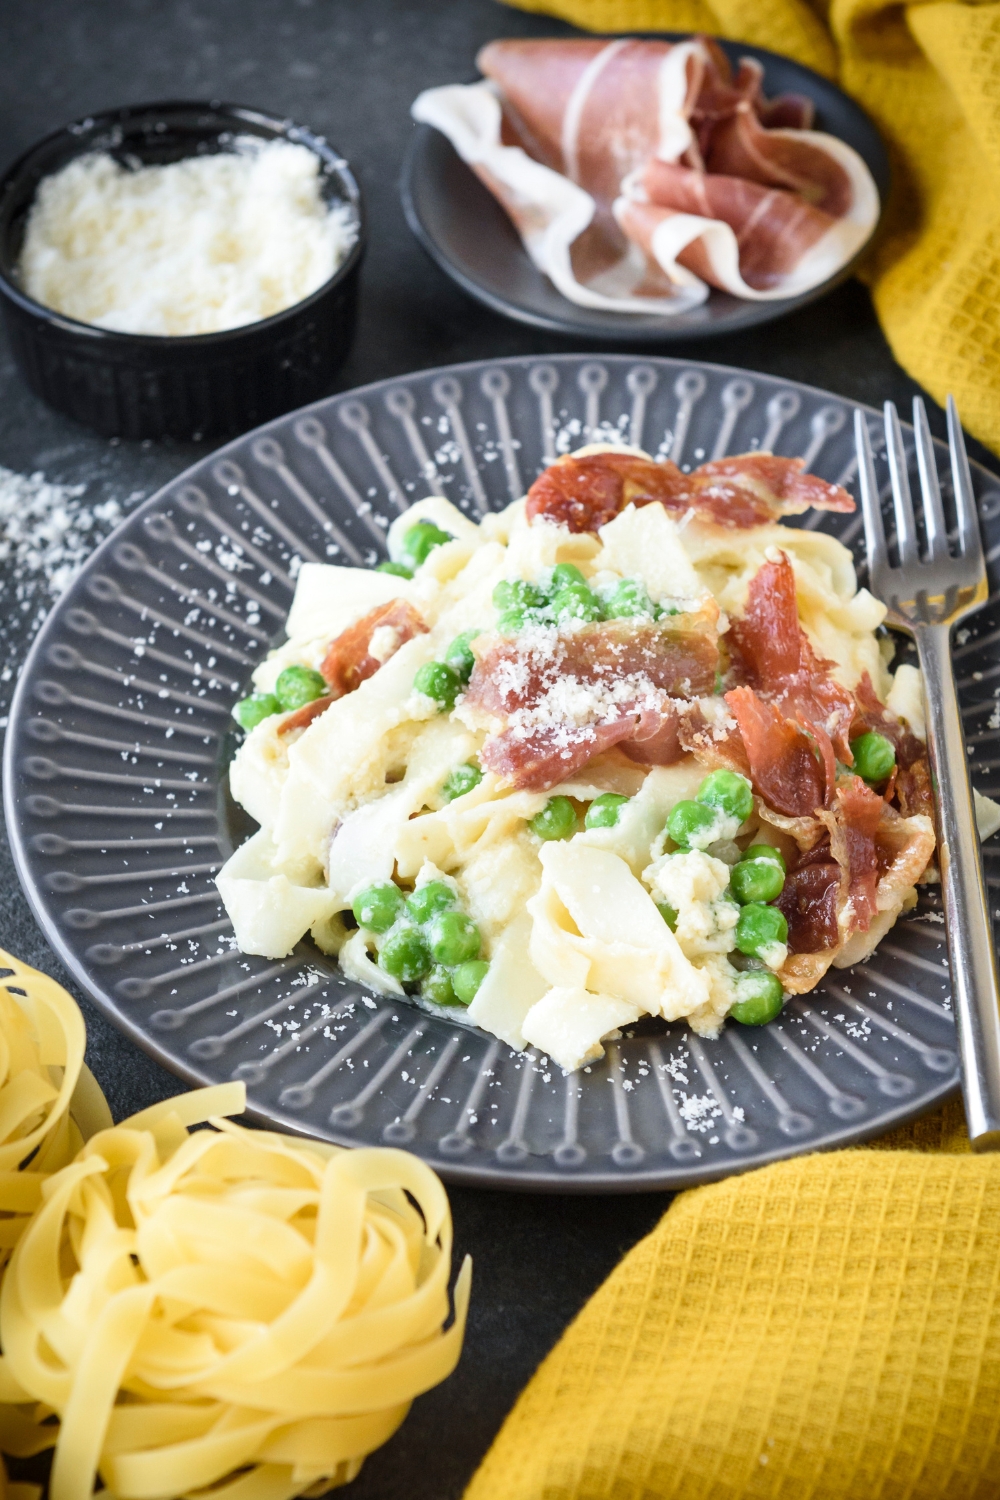 A plate filled with cooked pasta mixed with peas and prosciutto in a creamy sauce with cheese on top.